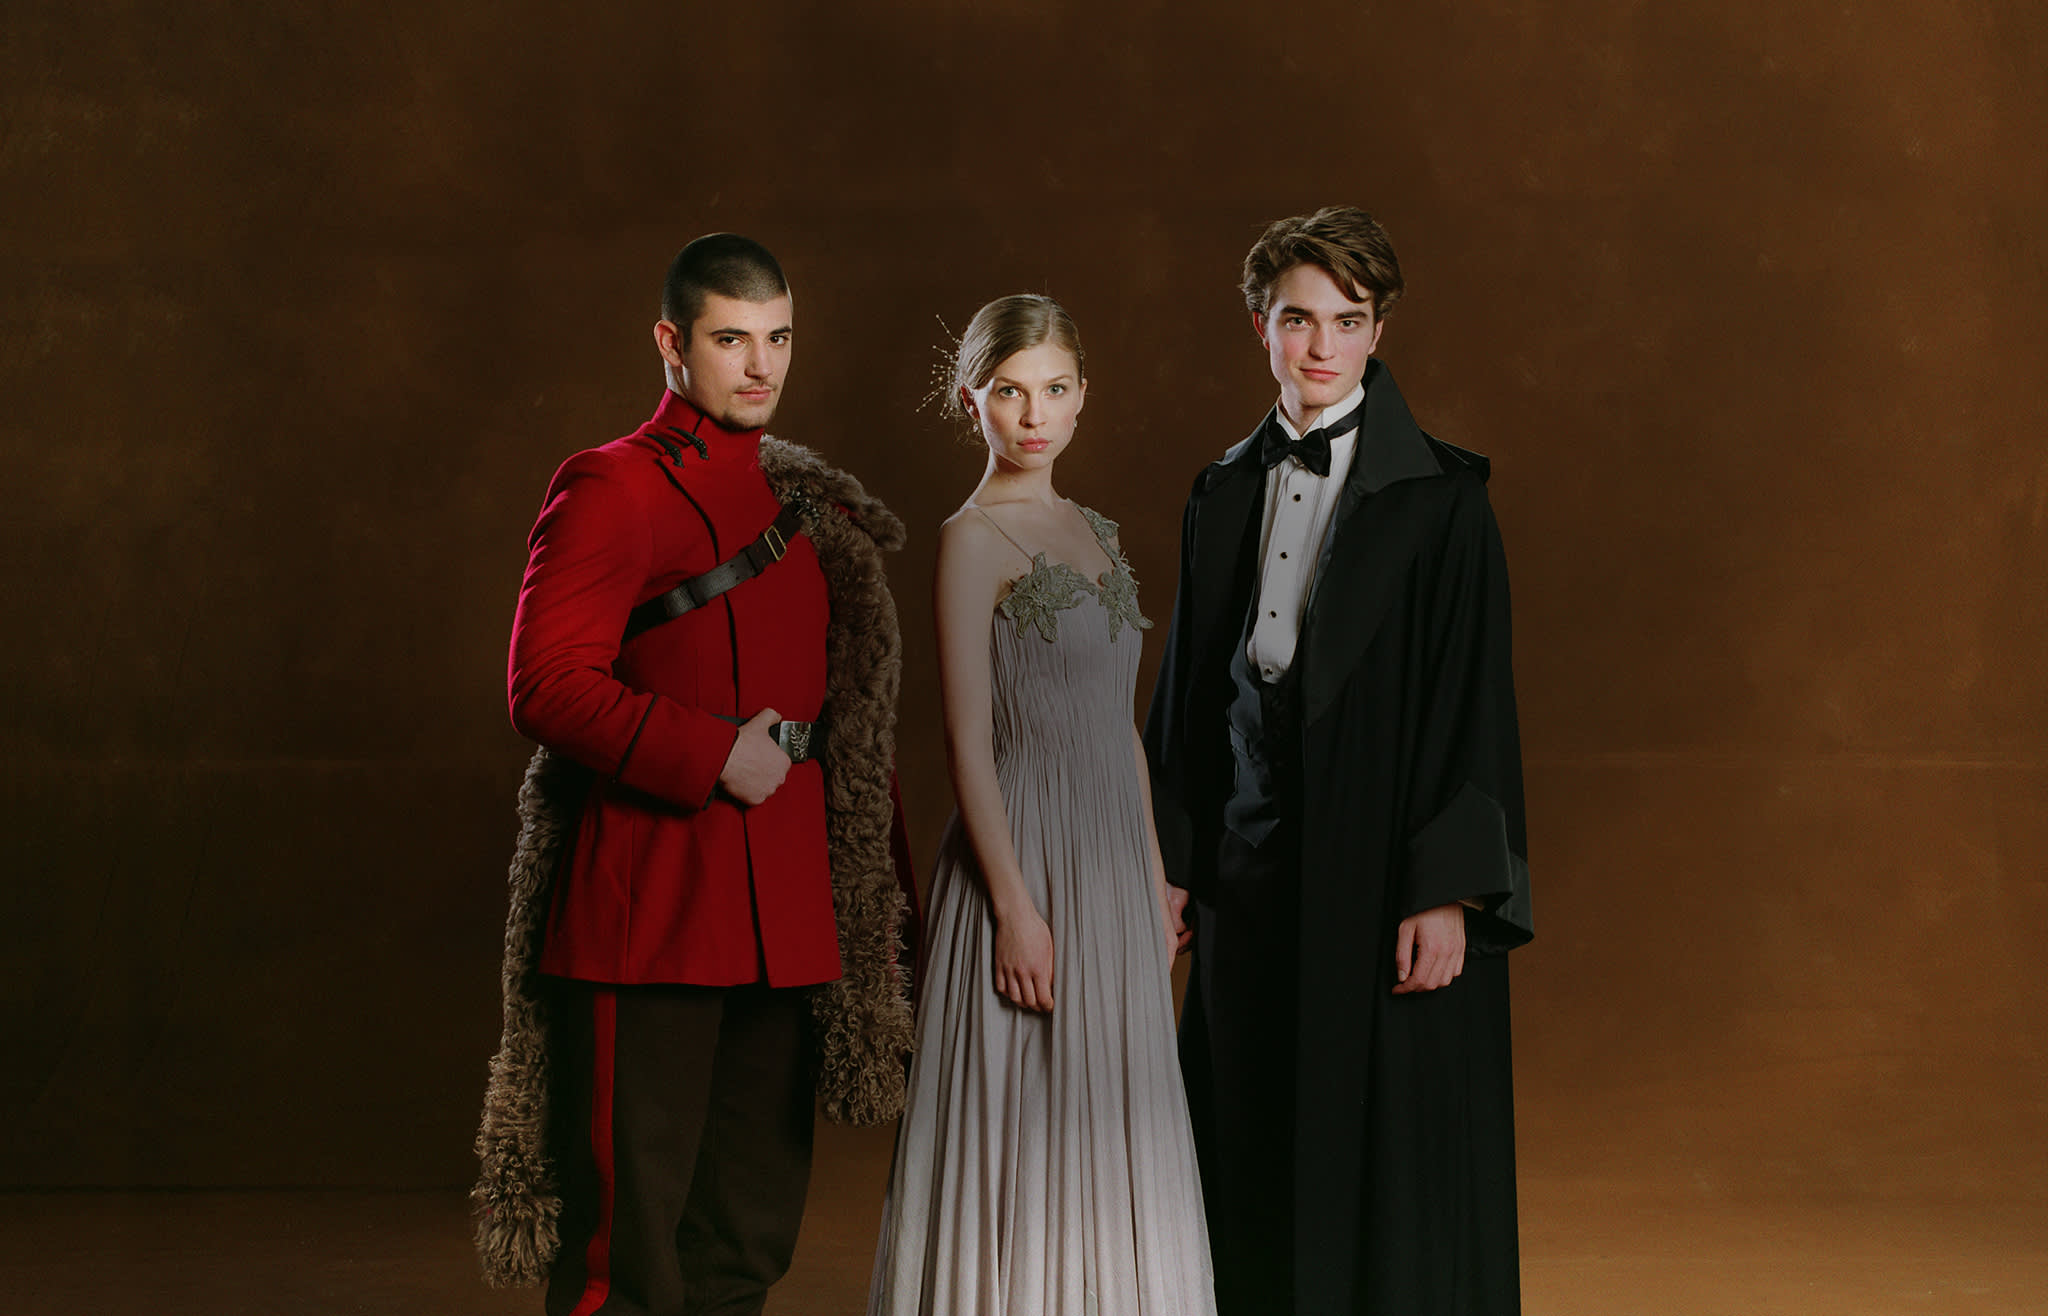 The Harry Potter Movies: A Guide to Wizarding World Fashion